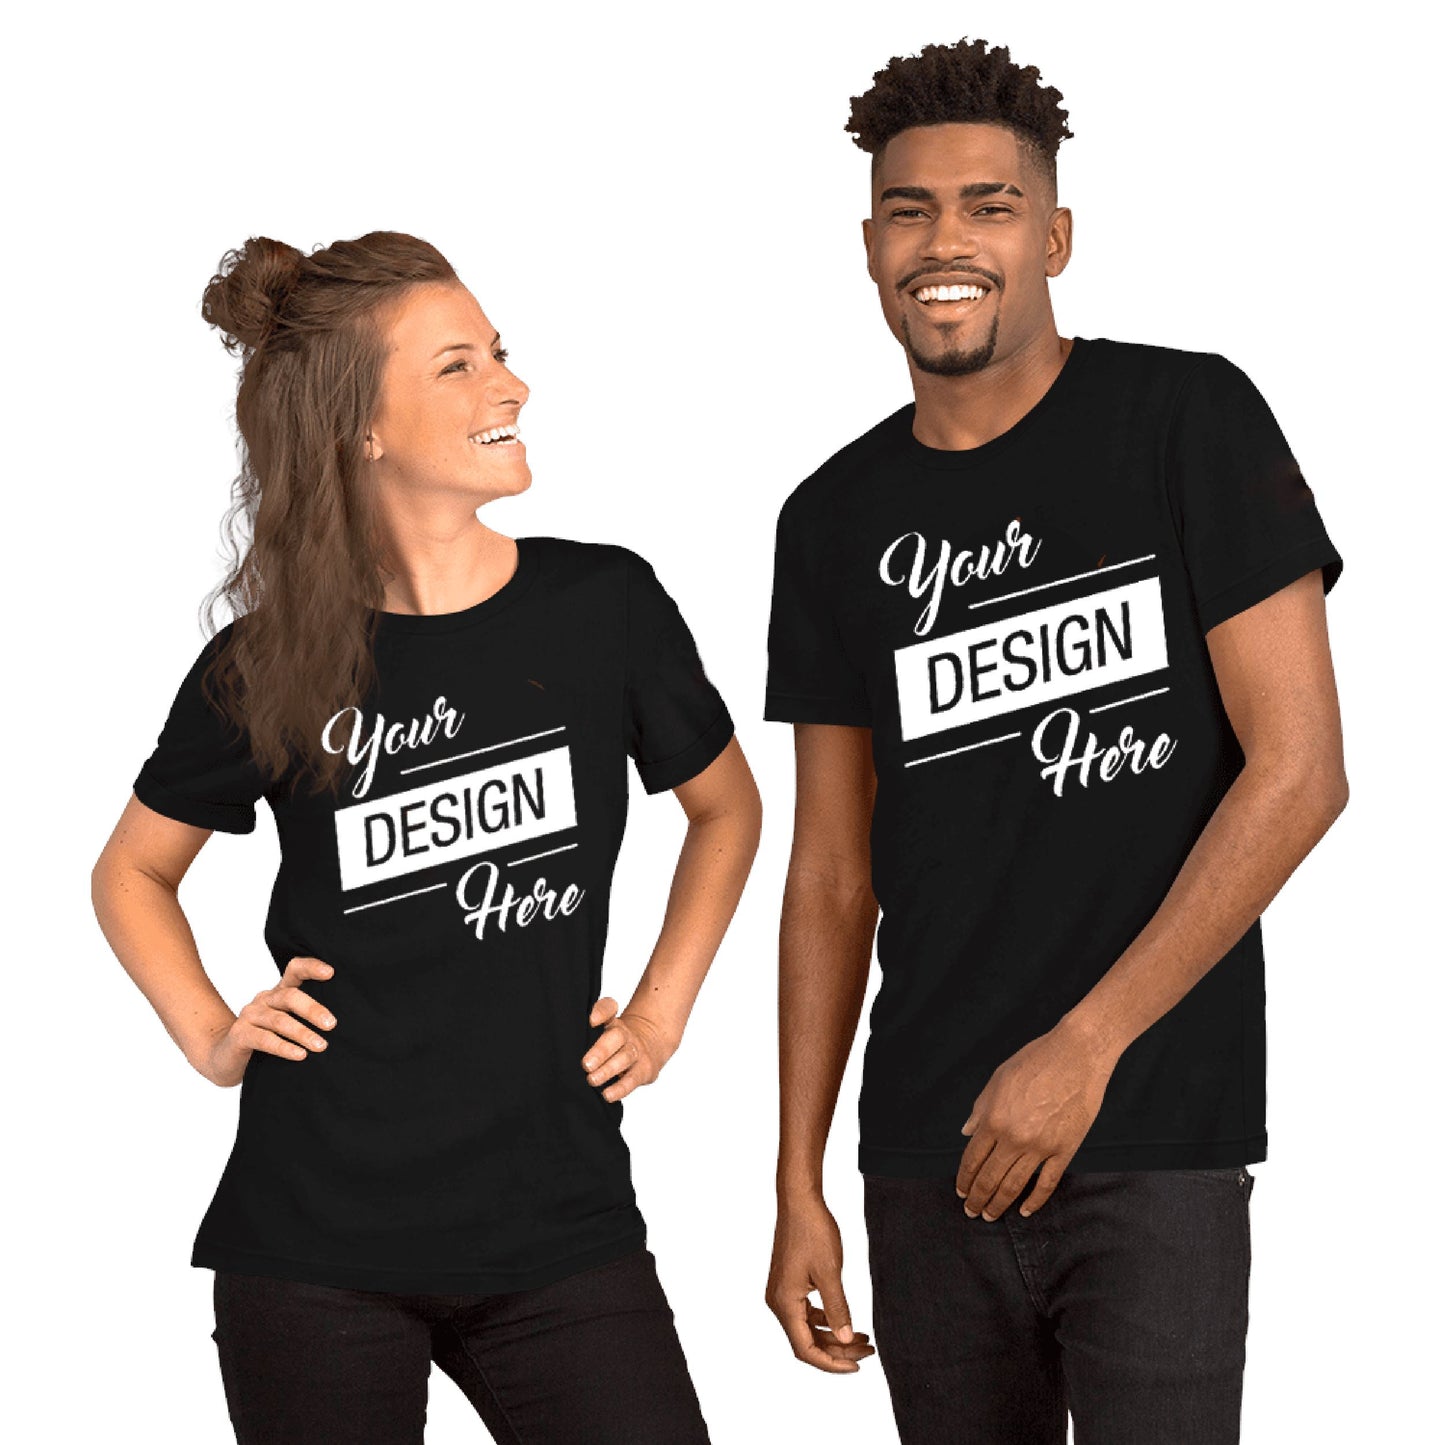 Customised Birthday T-shirts With Your Design